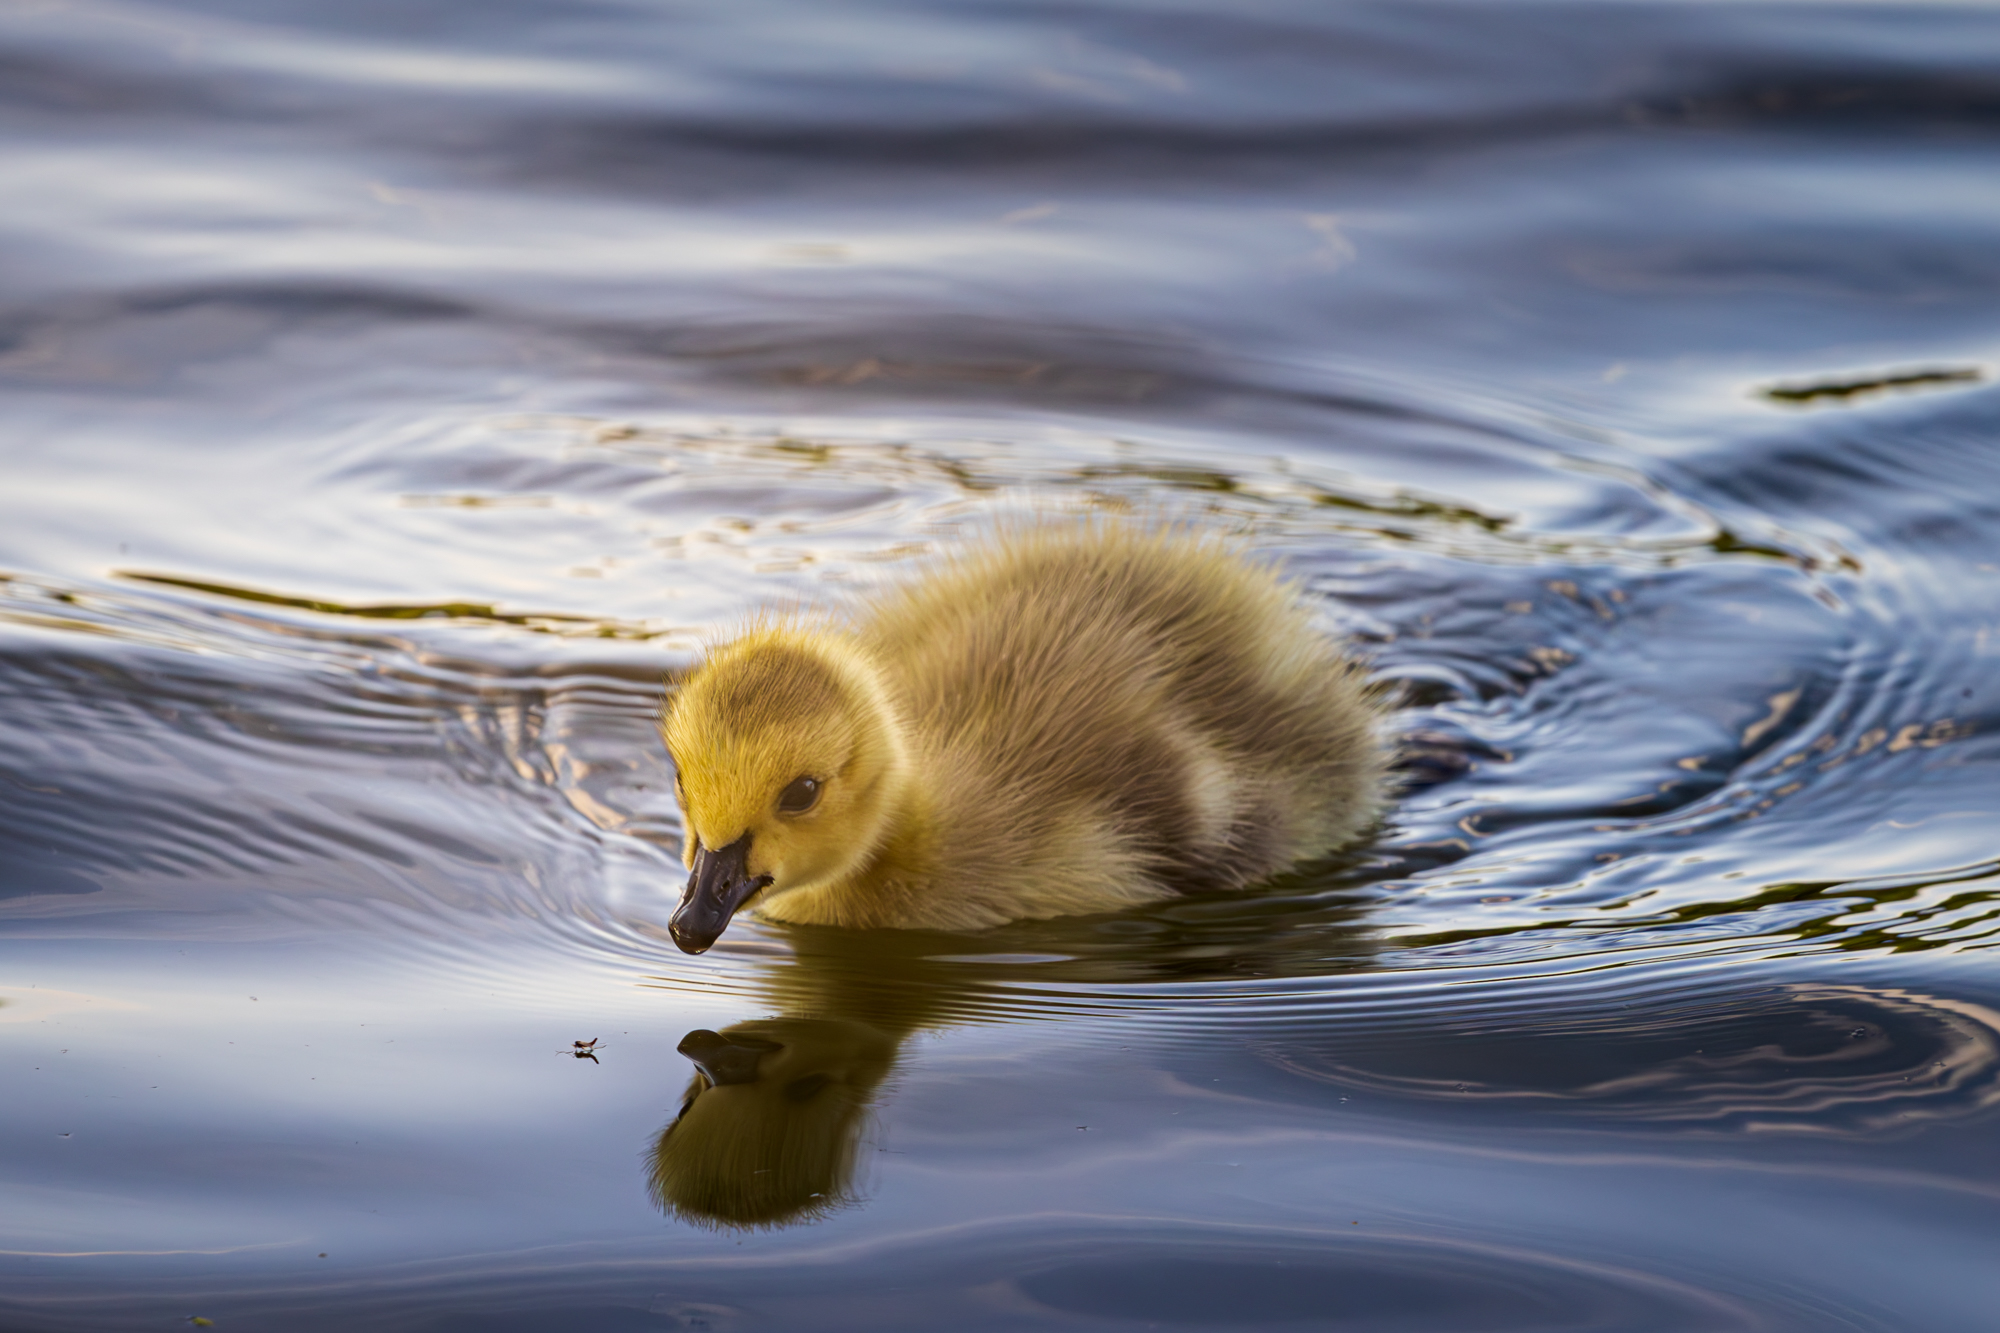 Mallard duckling swimming in the water, curiously looking at a bug on the surface of the water